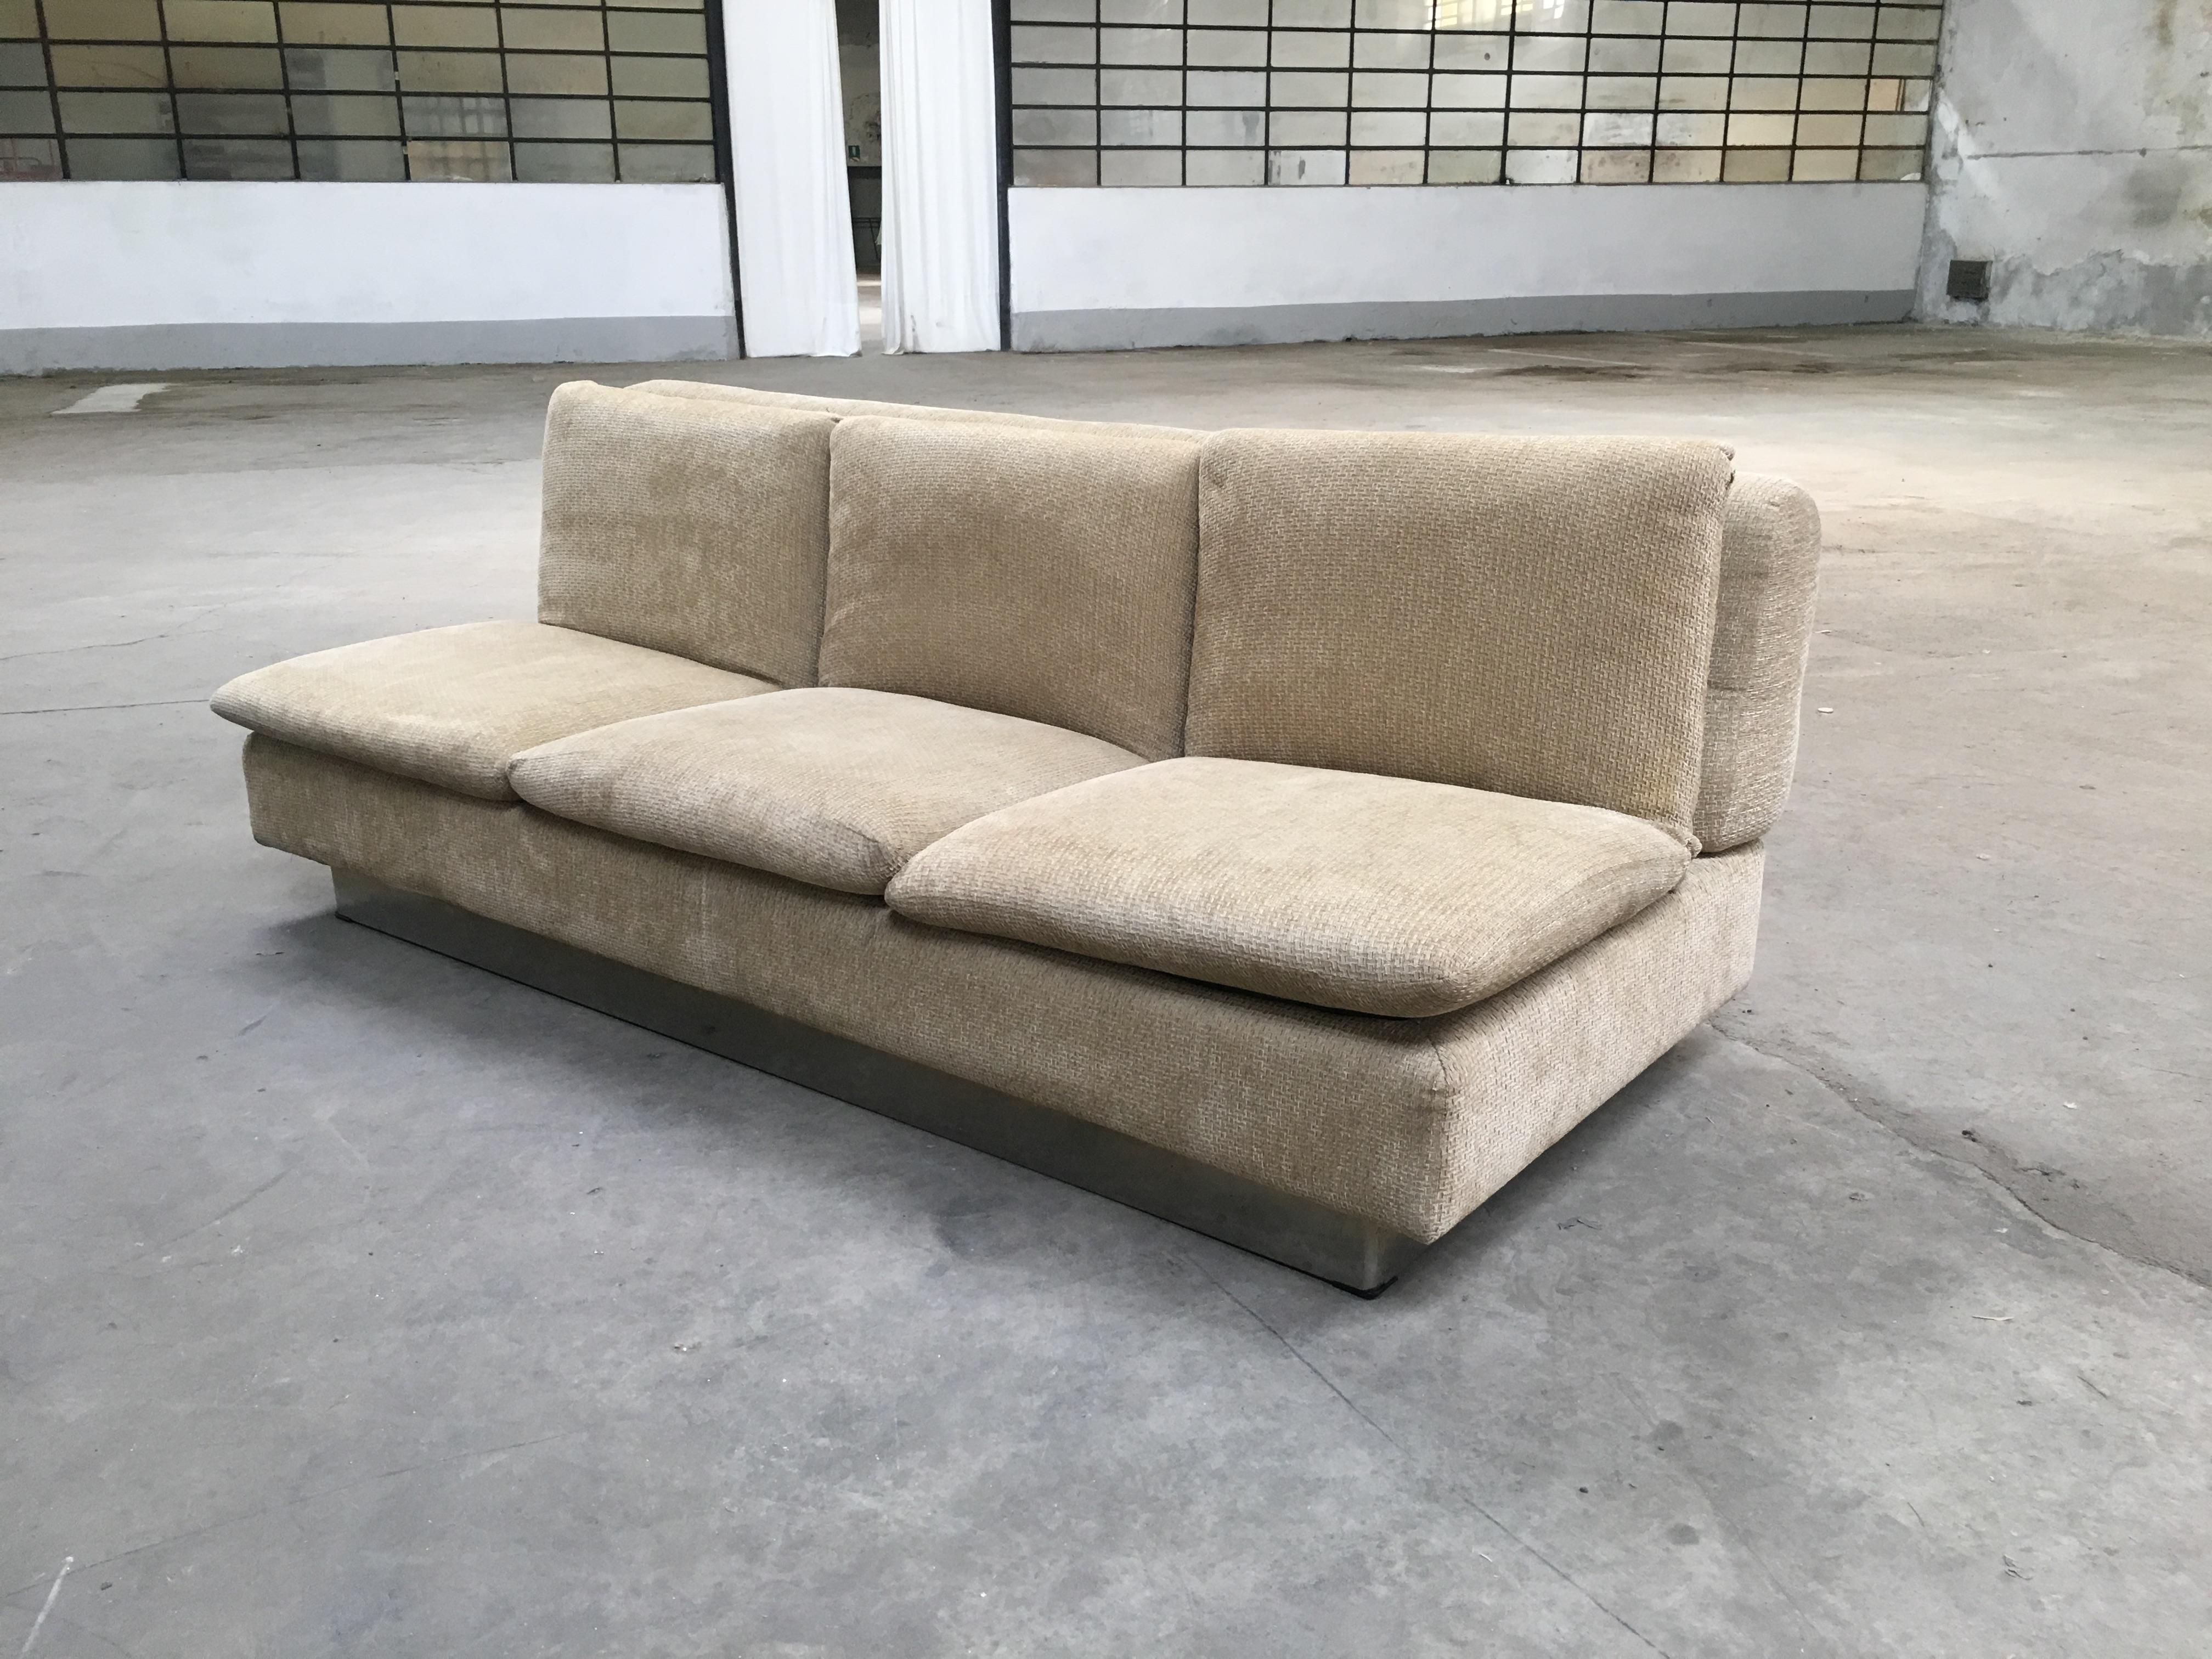 Three-seat sofa bed by Saporiti with original fabric from 1970s.
This sofa could come with another one identical but not convertible to bed as shown in the photo.. Quotation for the pair (one sofa bed and one sofa) on request.
      